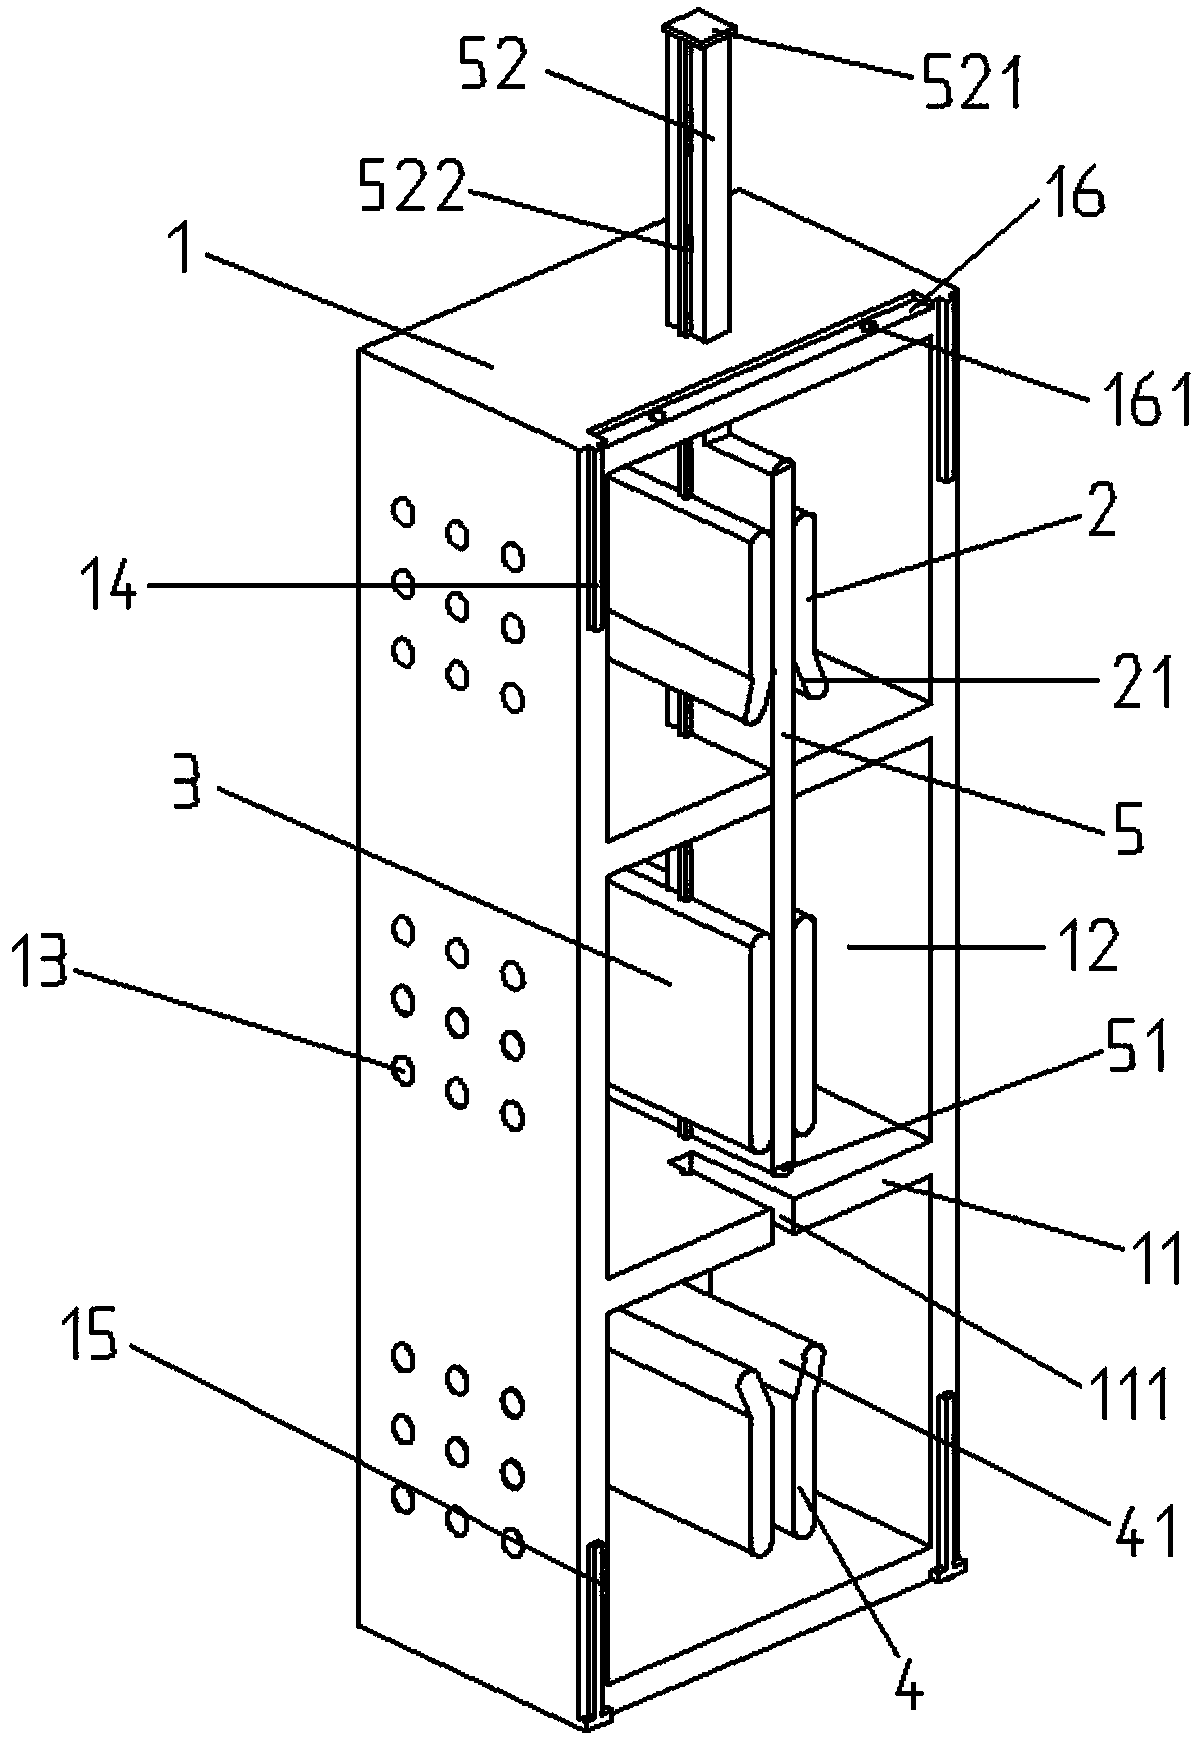 Dual-power switching protection device